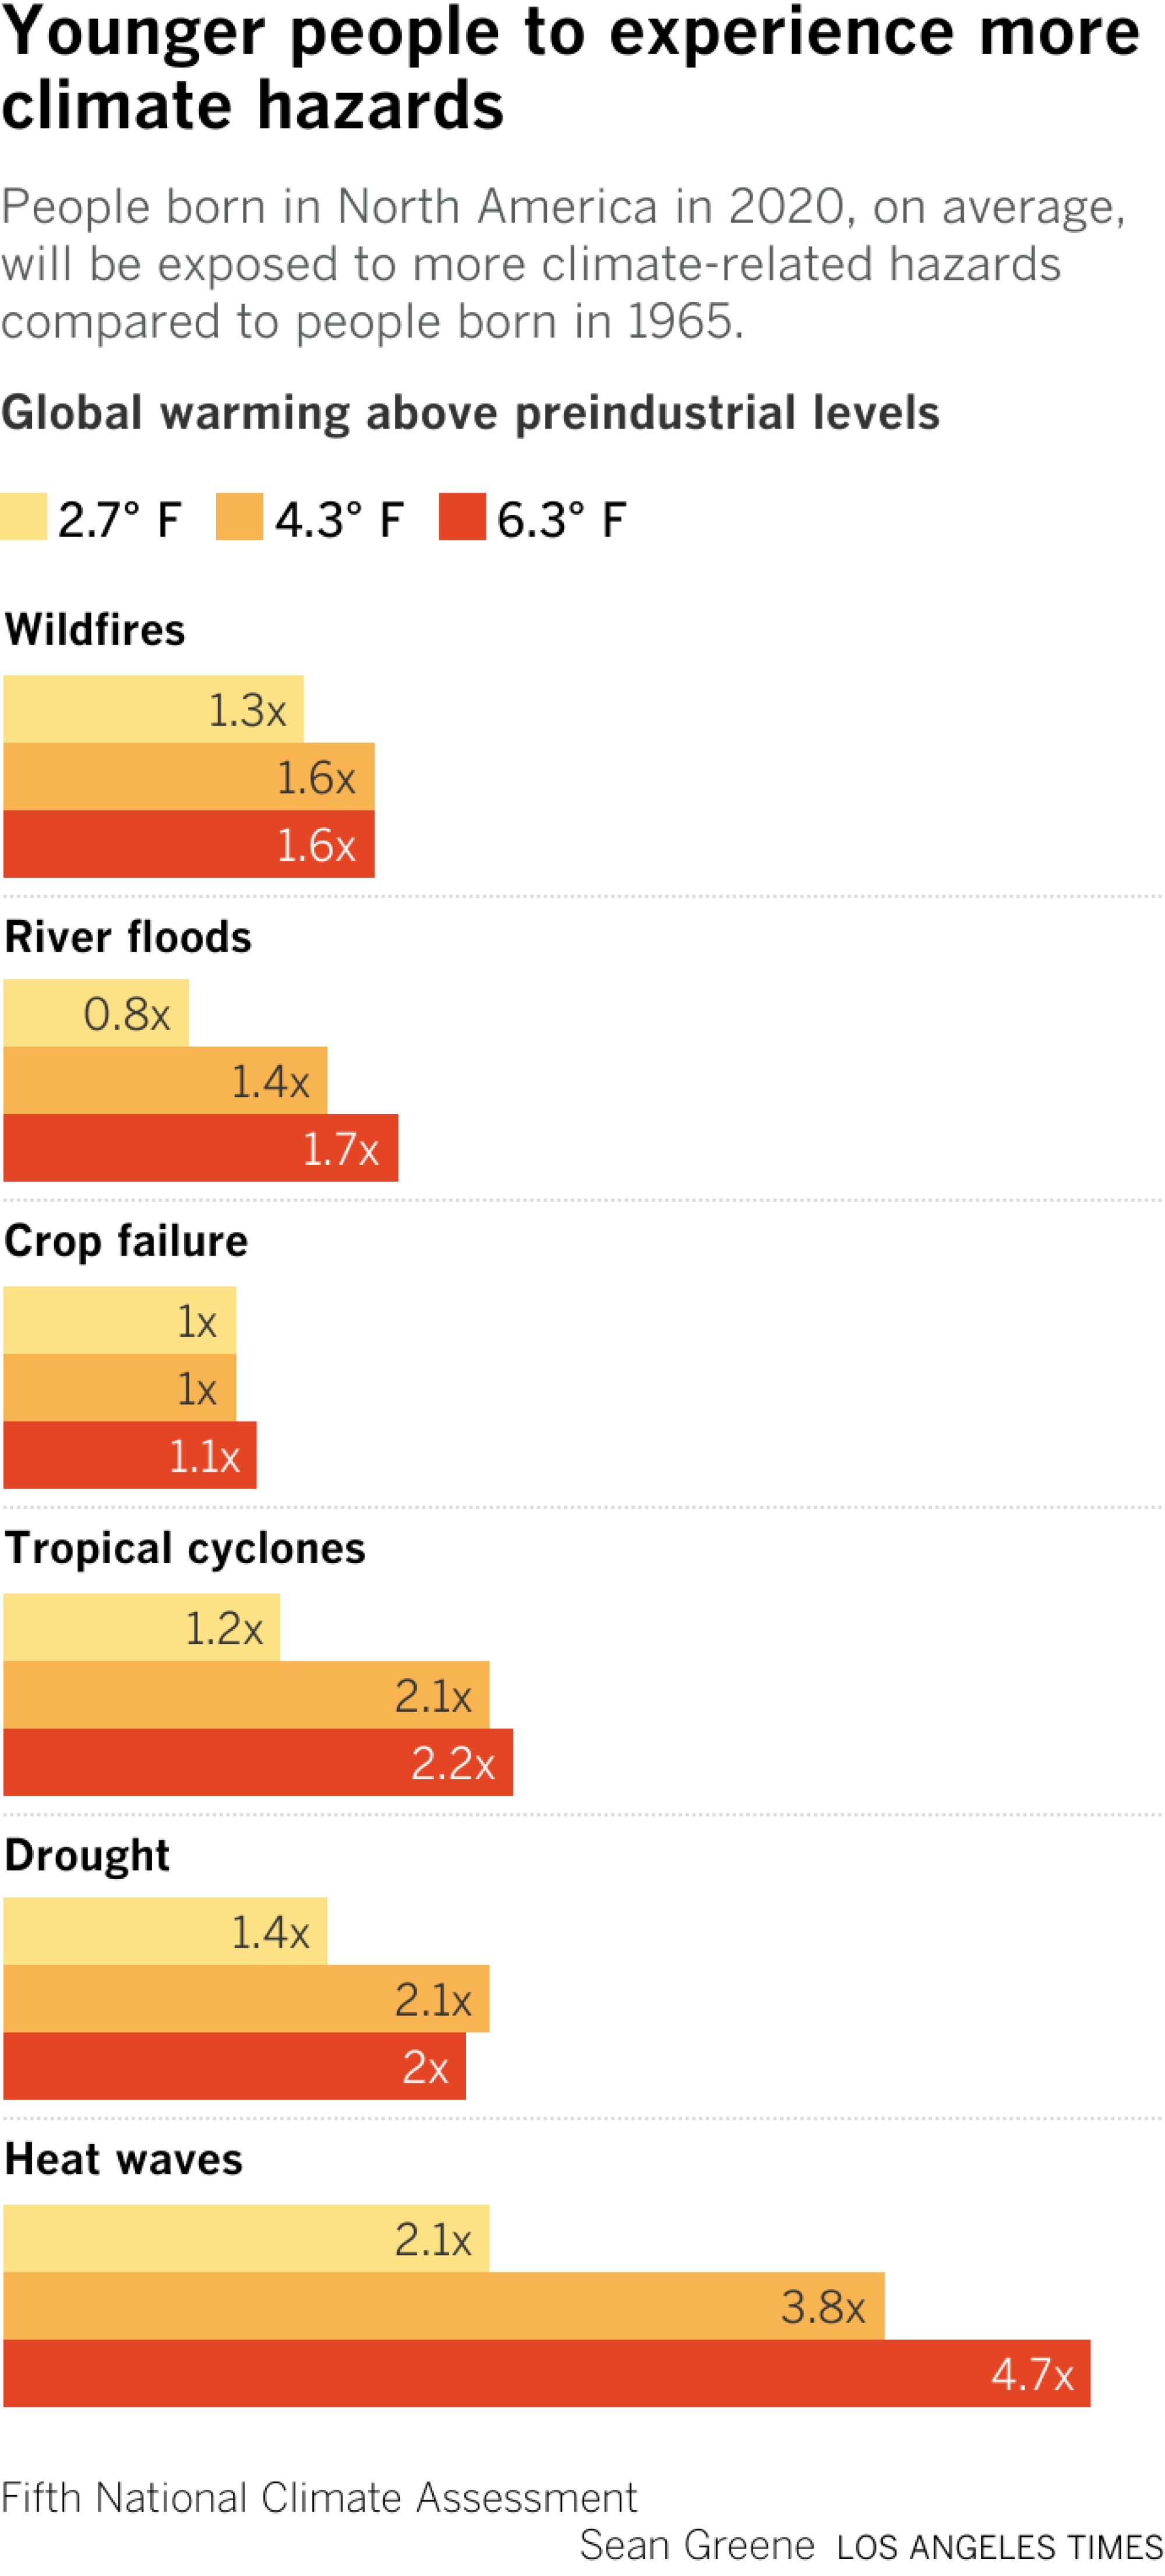 Bar chart shows the increase in wildfires, floods, crop failures, cyclones, droughts and heatwaves under different global warming scenarios.